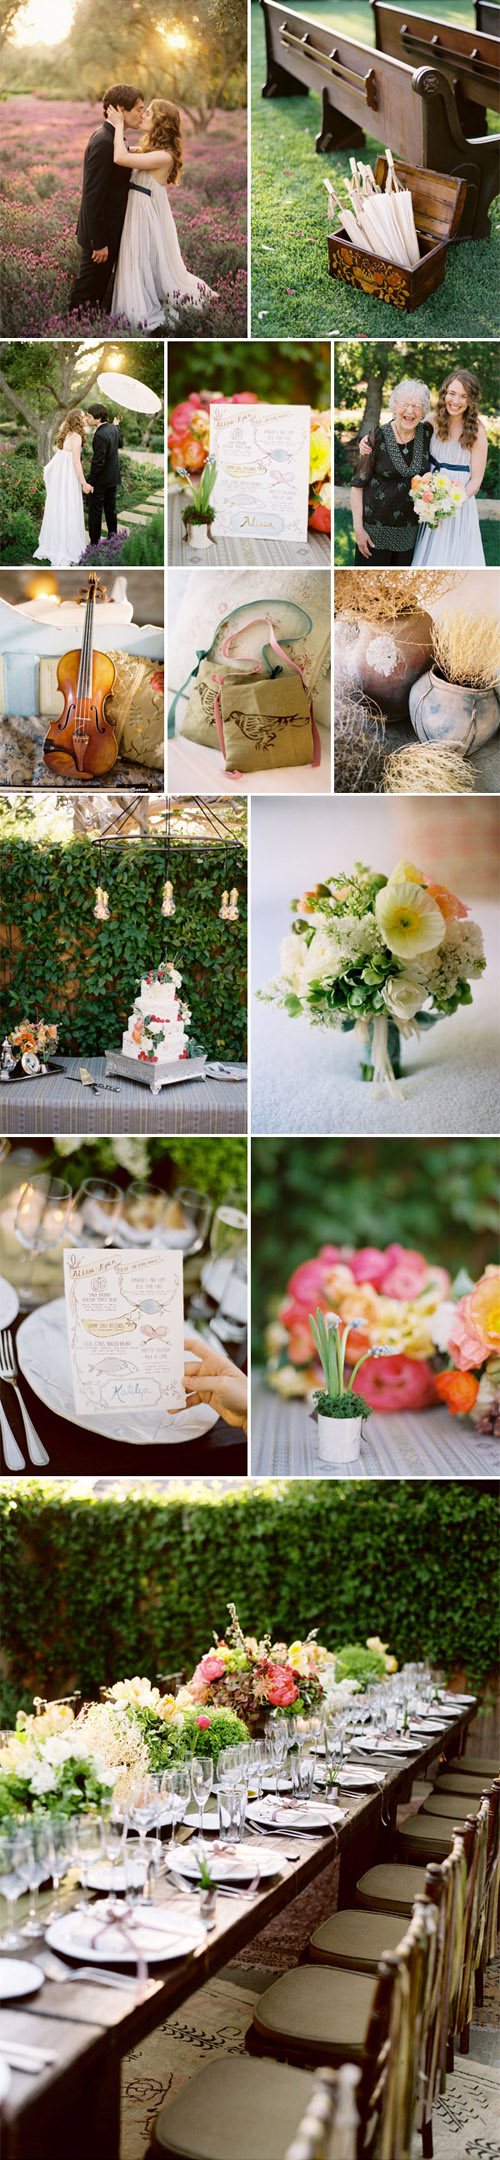 Bohemian chic California wedding from Lisa Vorce of Oh How Charming! photographed by Jose Villa